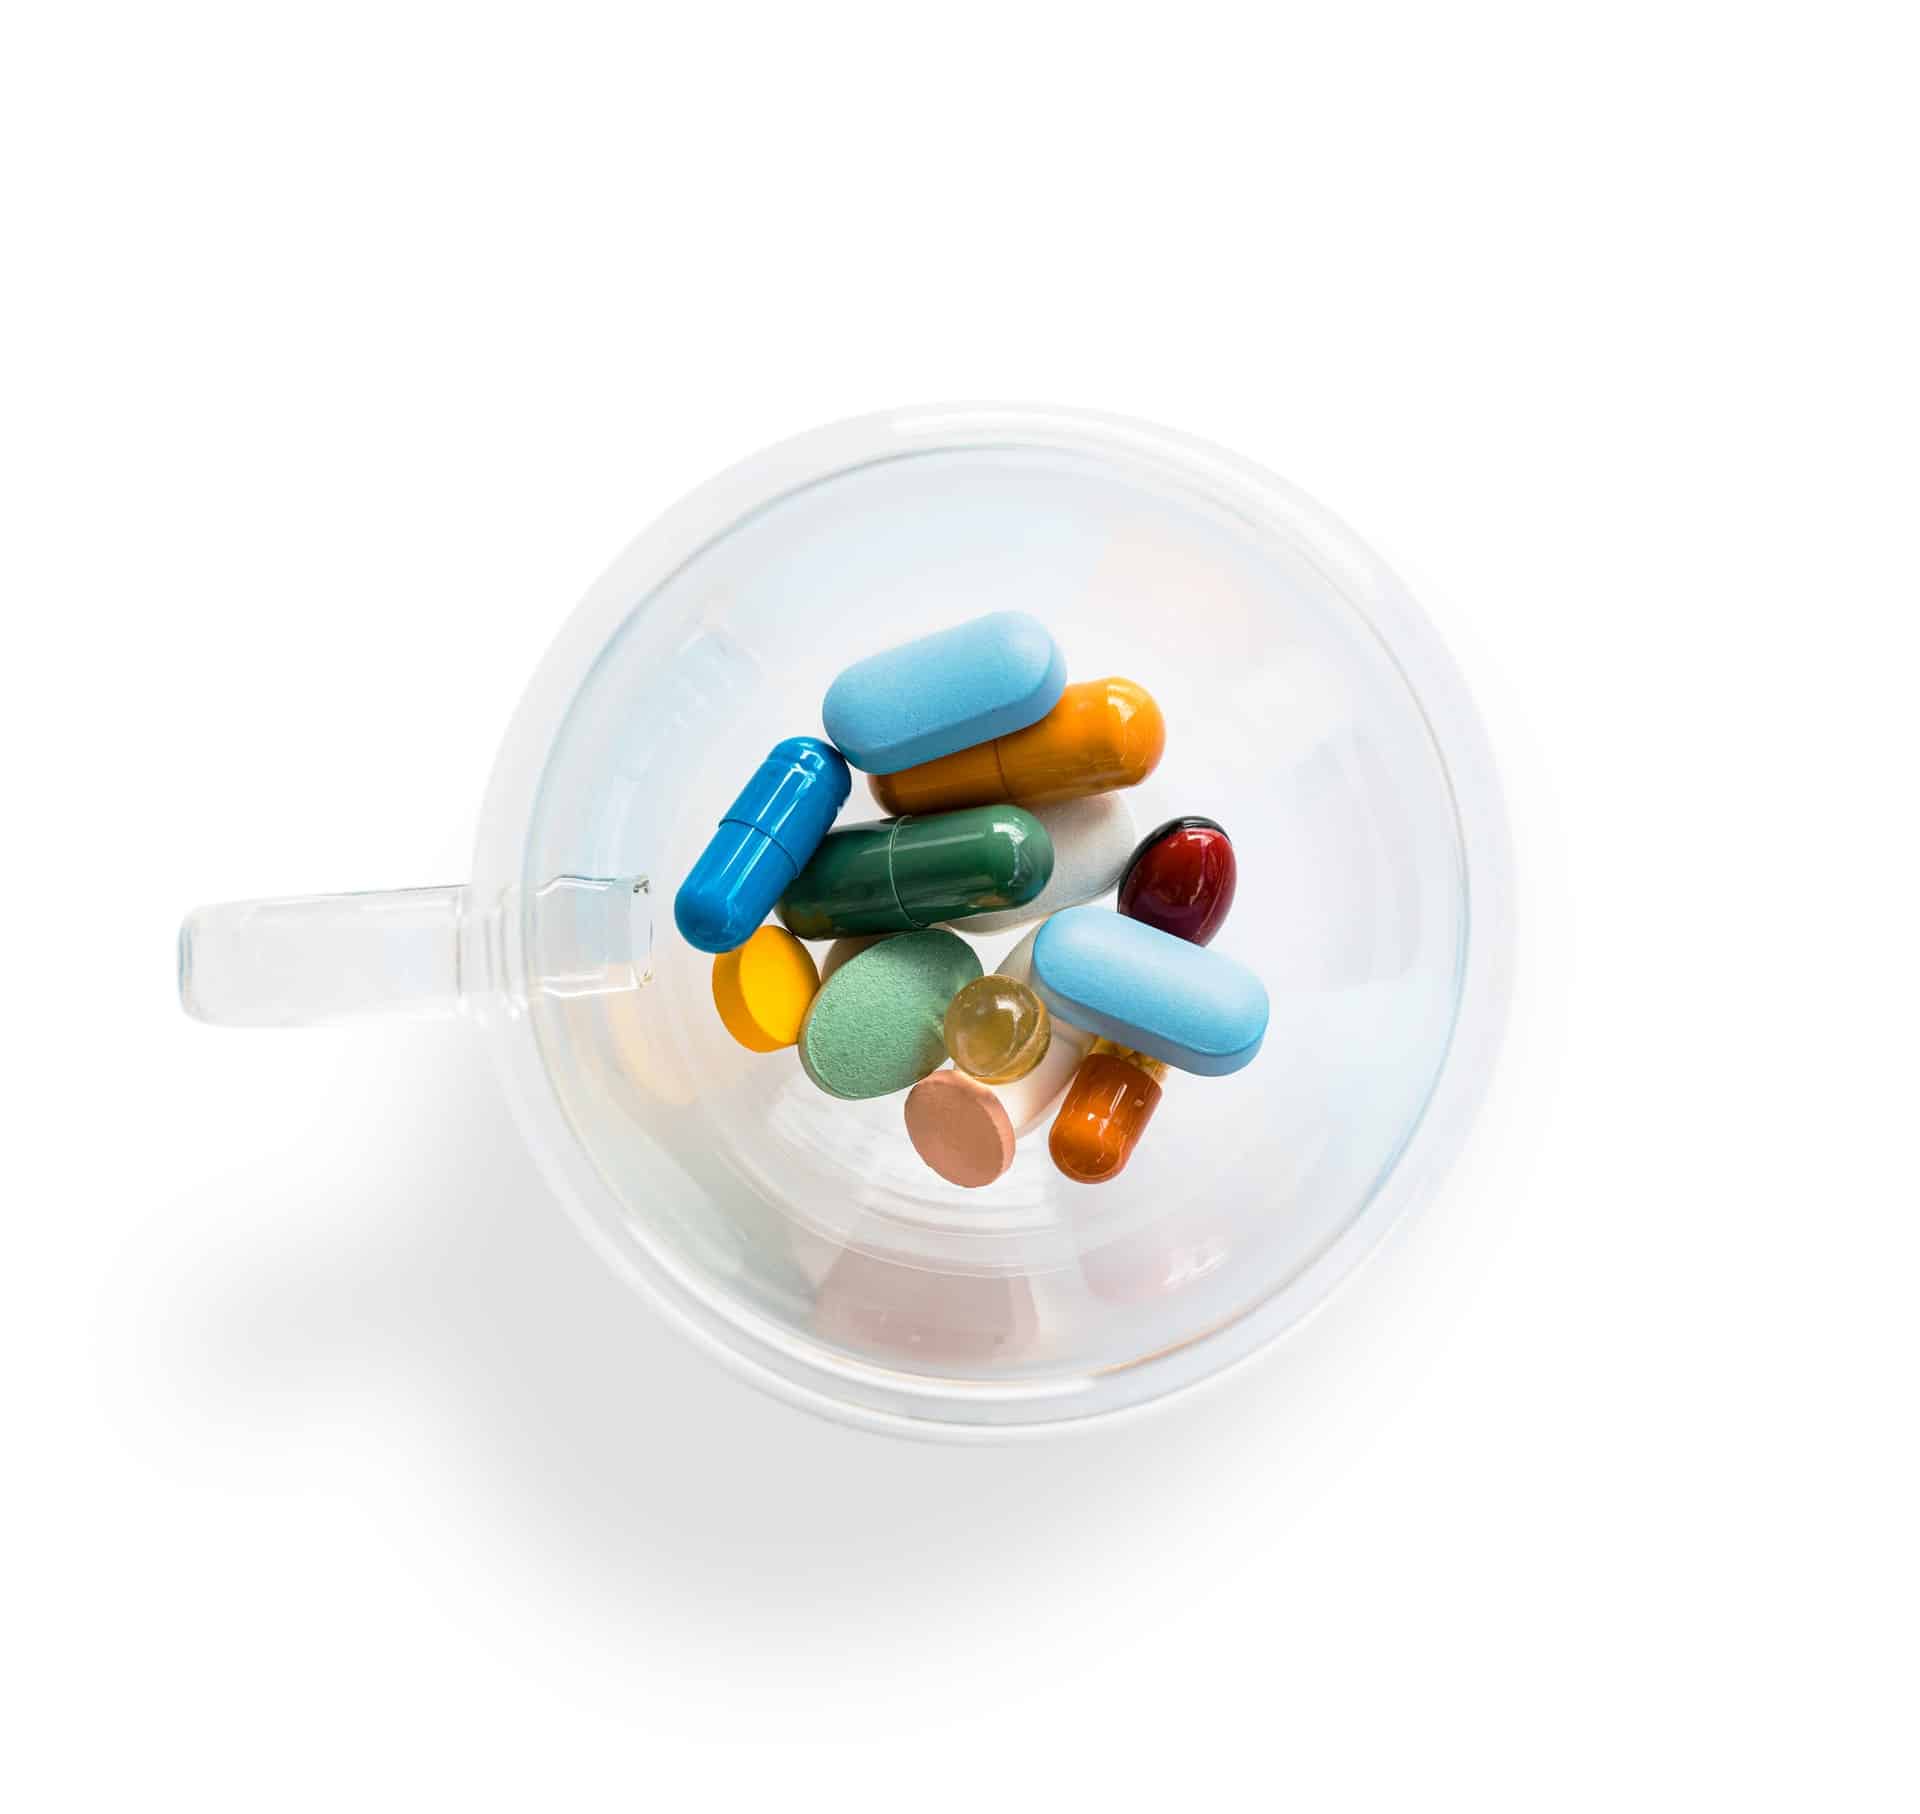 About Customized Medication Header Image